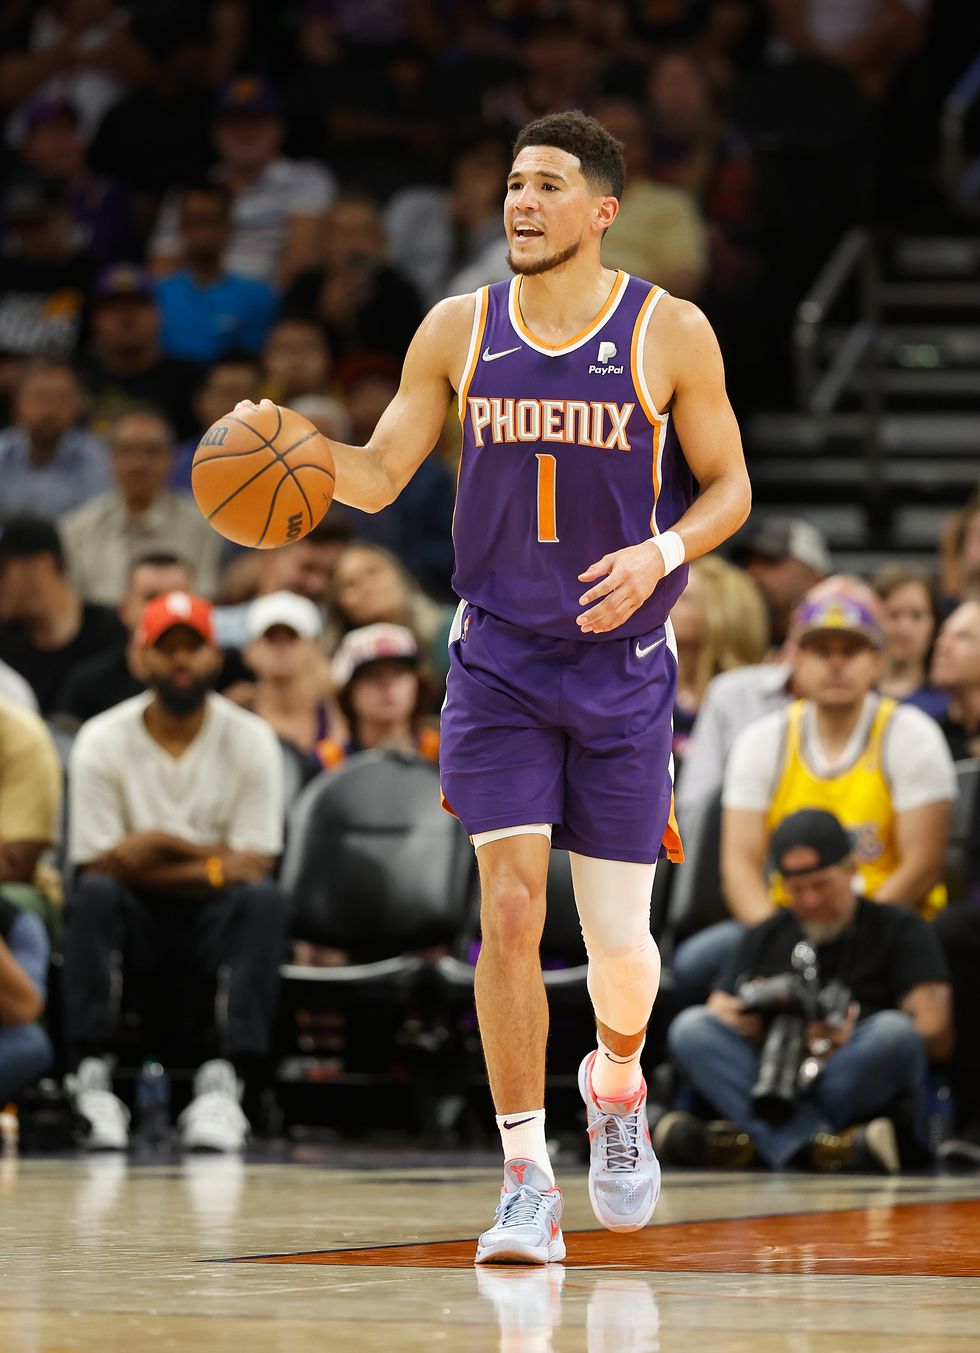 devin booker during the los angeles lakers v phoenix suns game on april 5, 2022